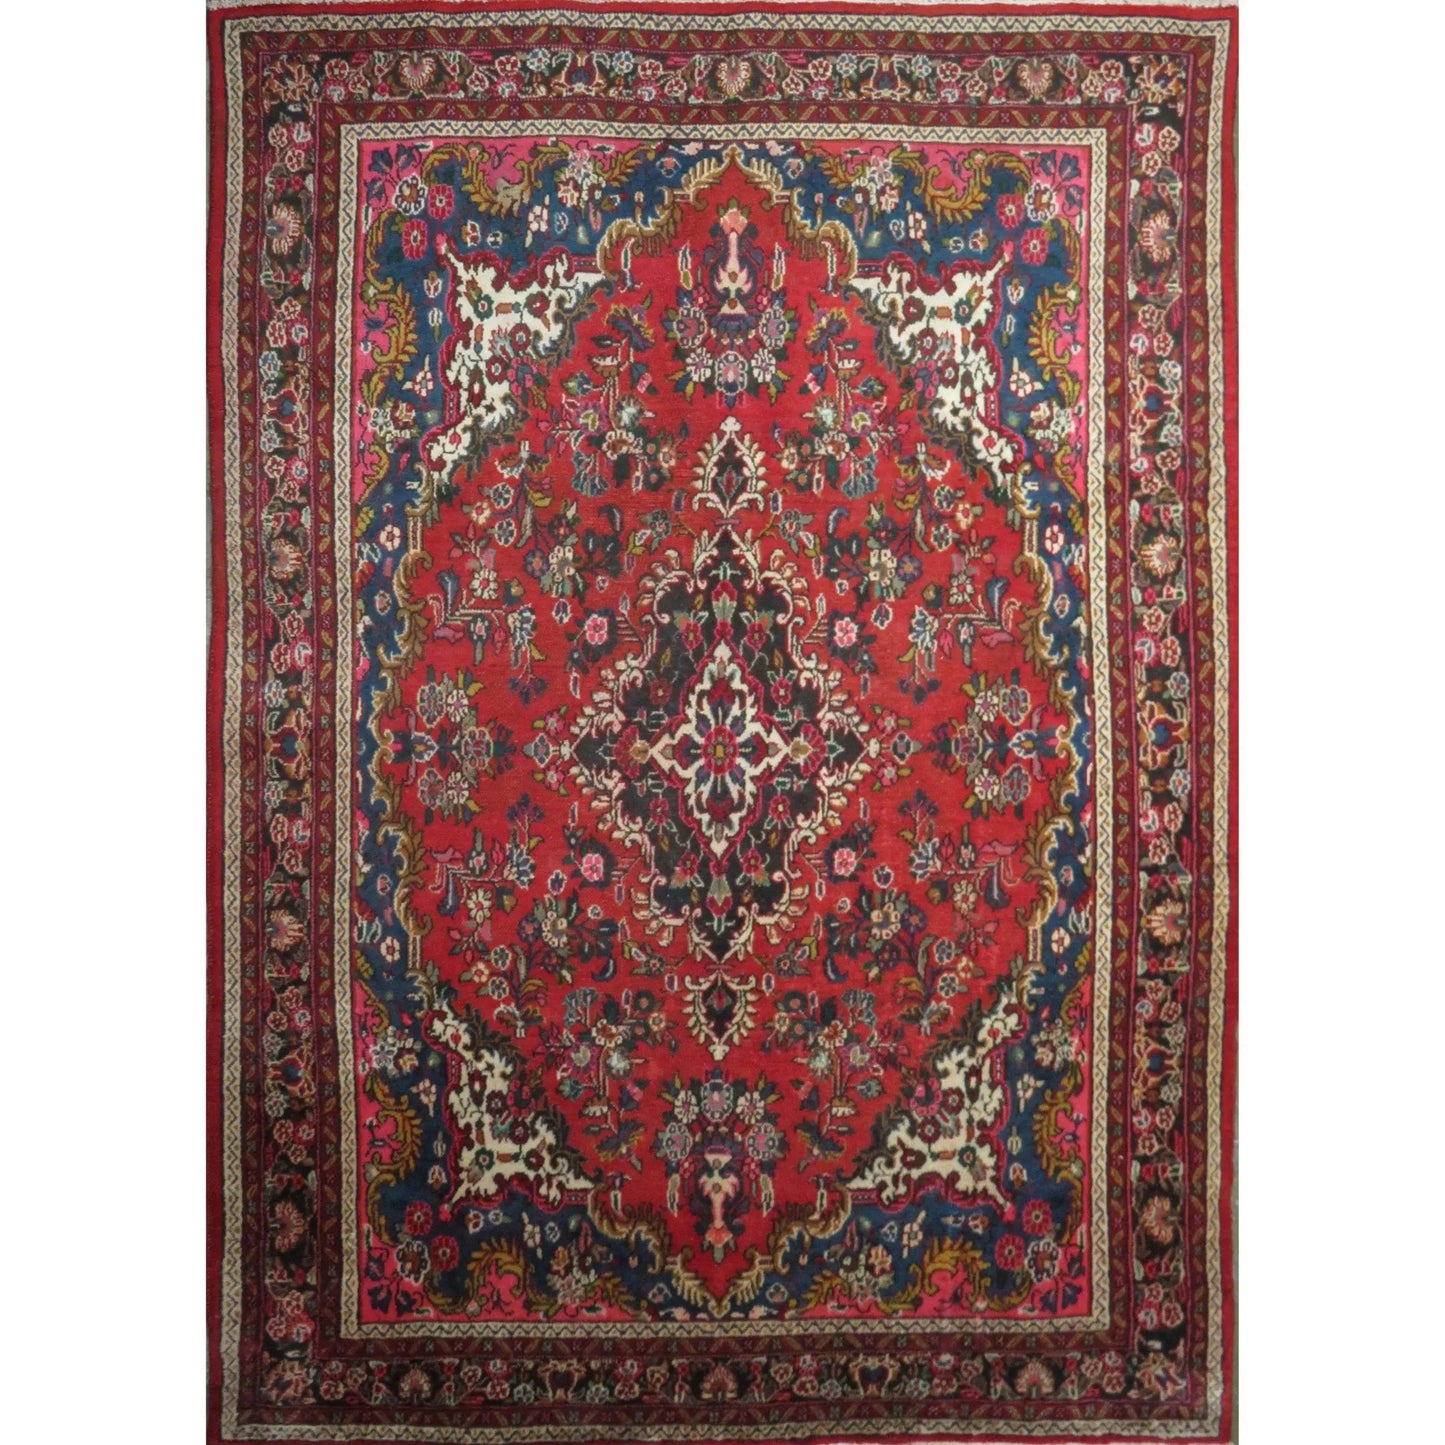 Hand-Knotted Persian Wool Rug _ Luxurious Vintage Design, 10'0" x 6'0", Artisan Crafted